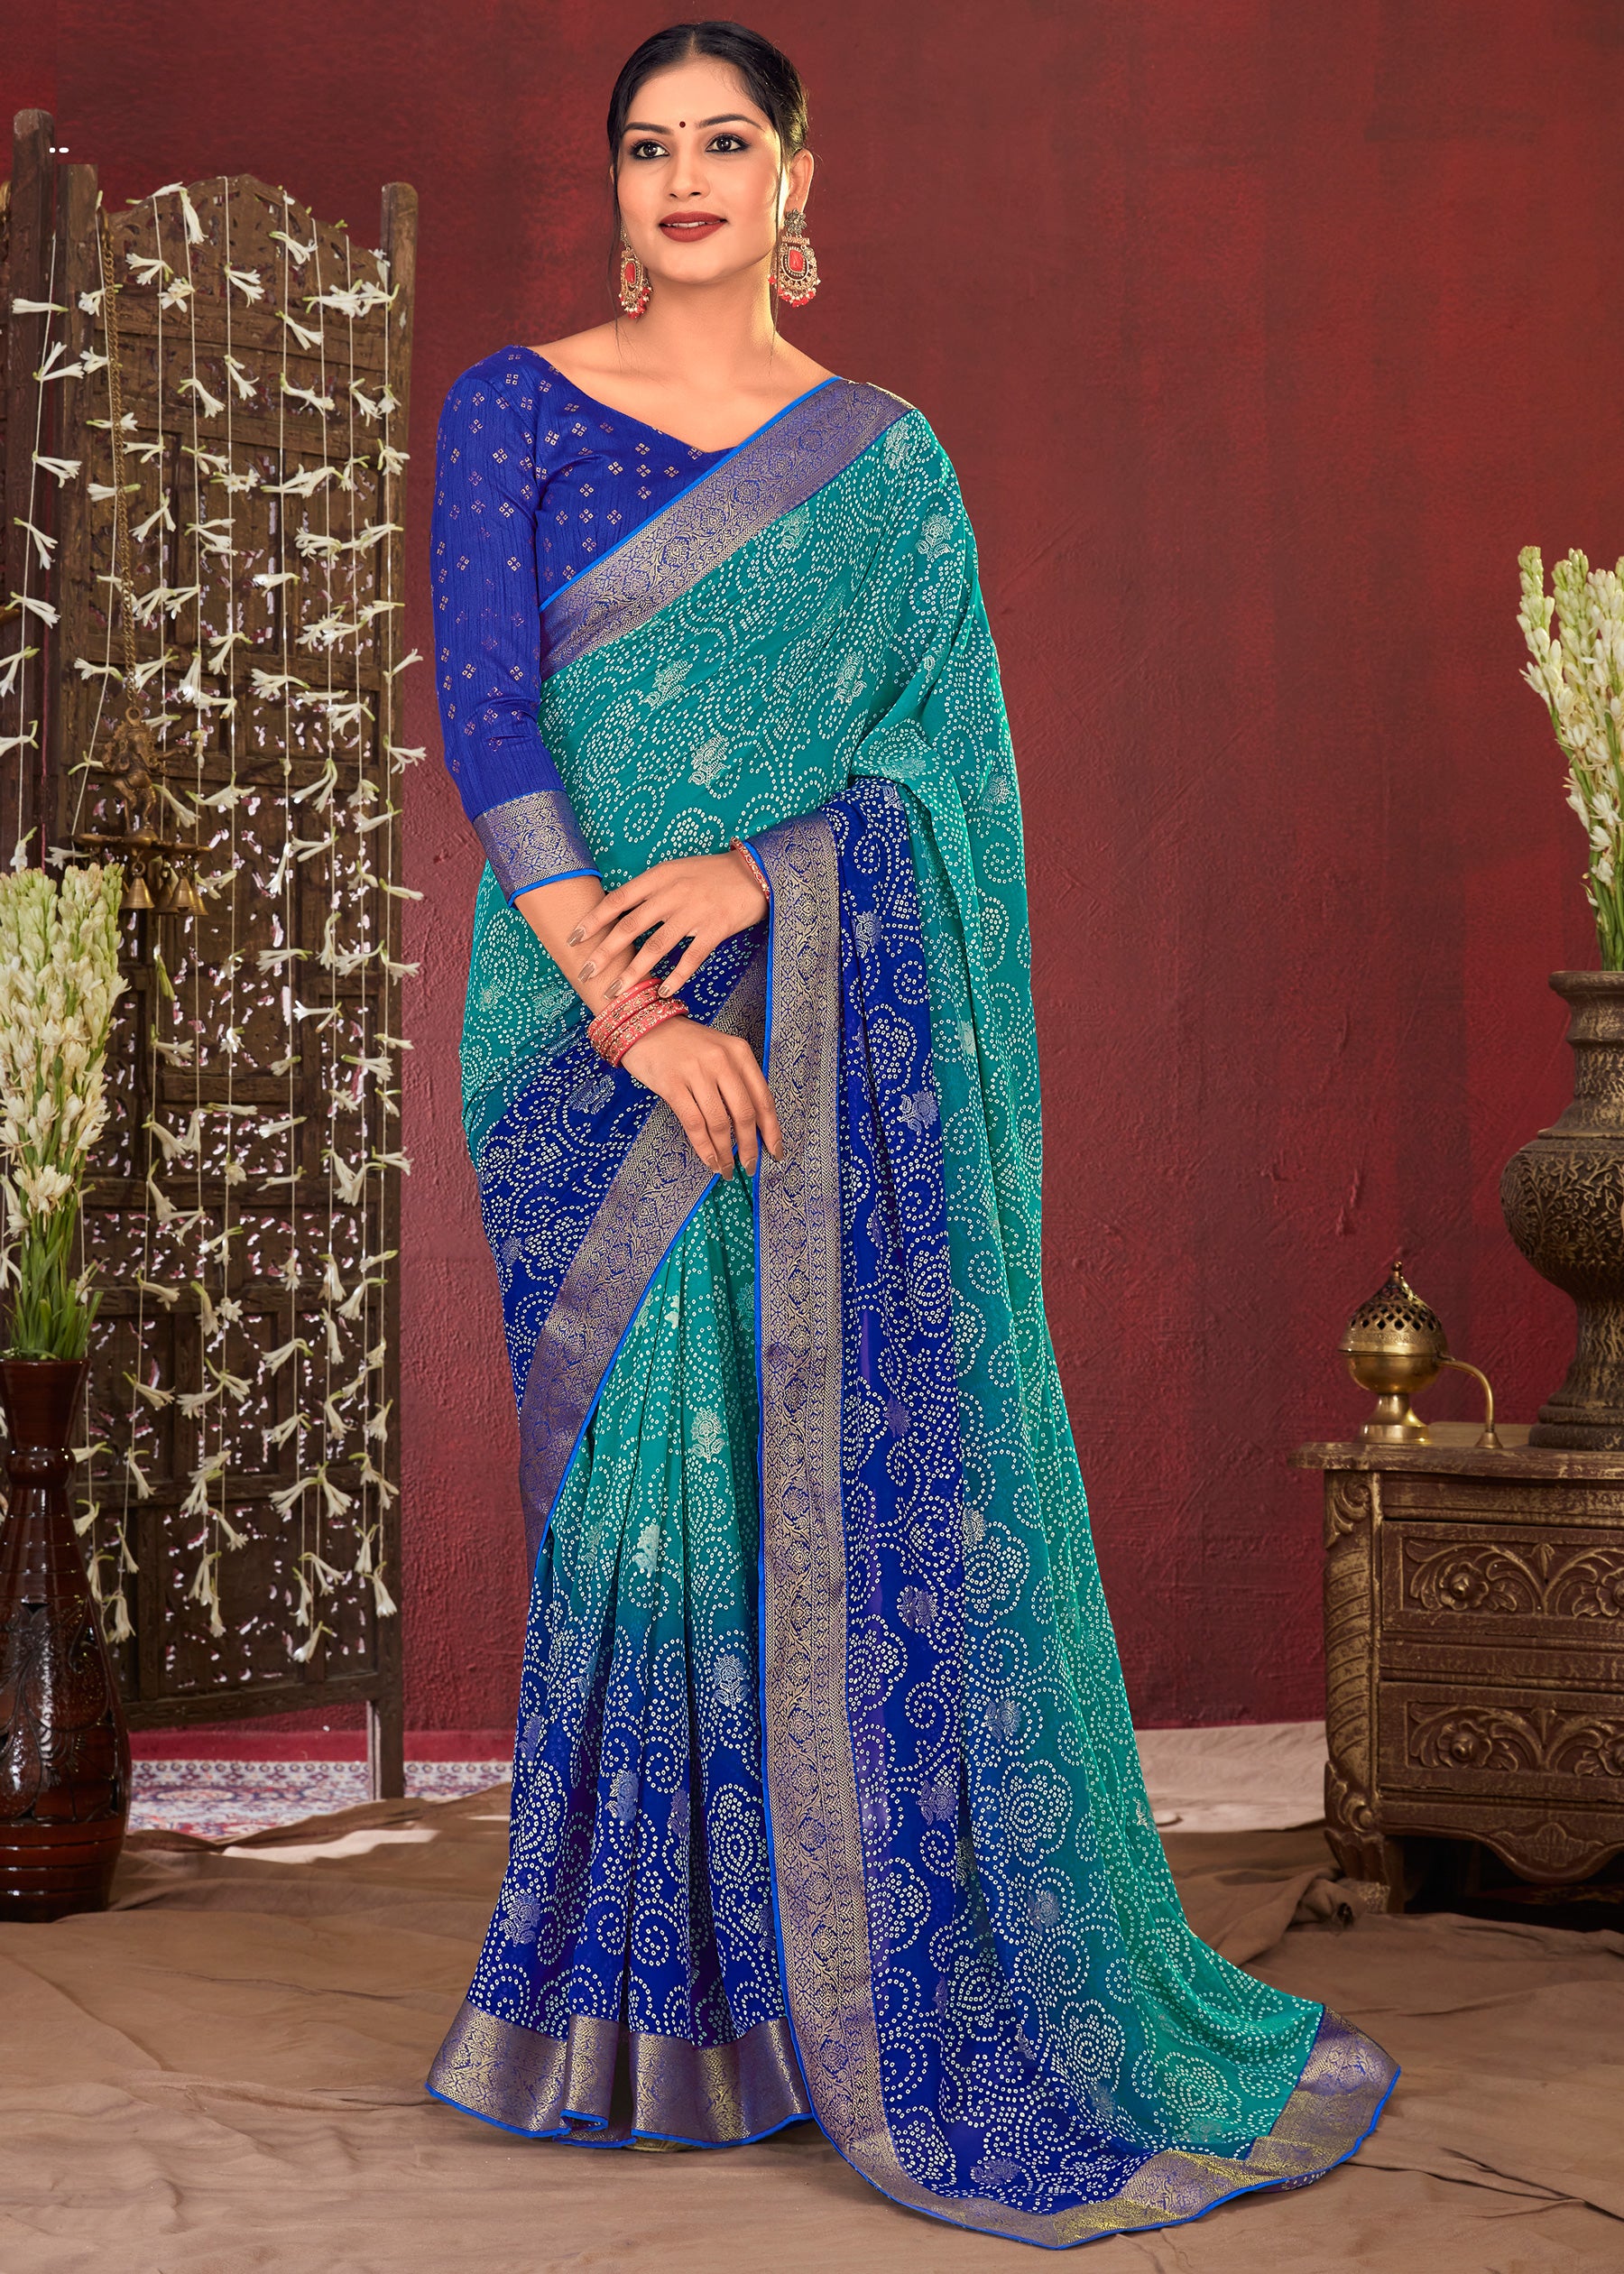 Dual Shades Bandhani Printed Royal Blue Weightless Georgette Saree With Embroidery Lace